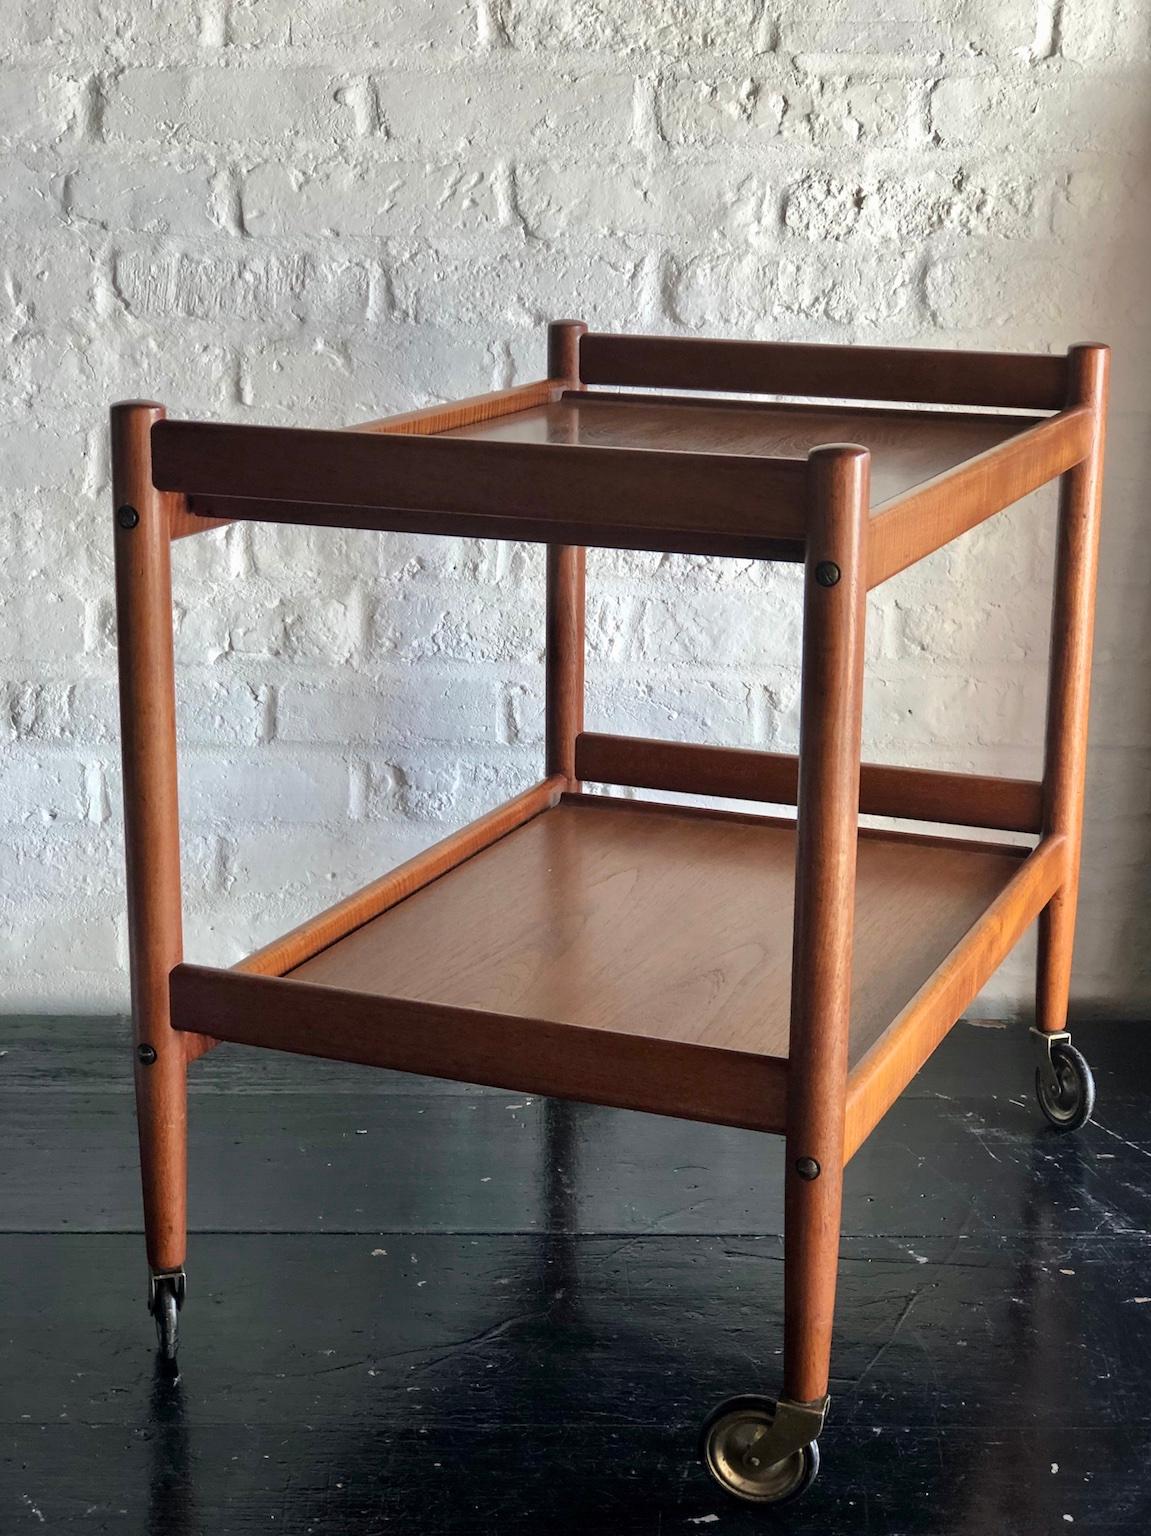 Mid century Danish teak drinks trolley / bar cart, 1960s

A two tier Danish teak trolley / bar cart with large rubber rimmed brass wheels.

Beautiful Danish quality and design, the shelf appears to be floating, but it is connected to 
the main